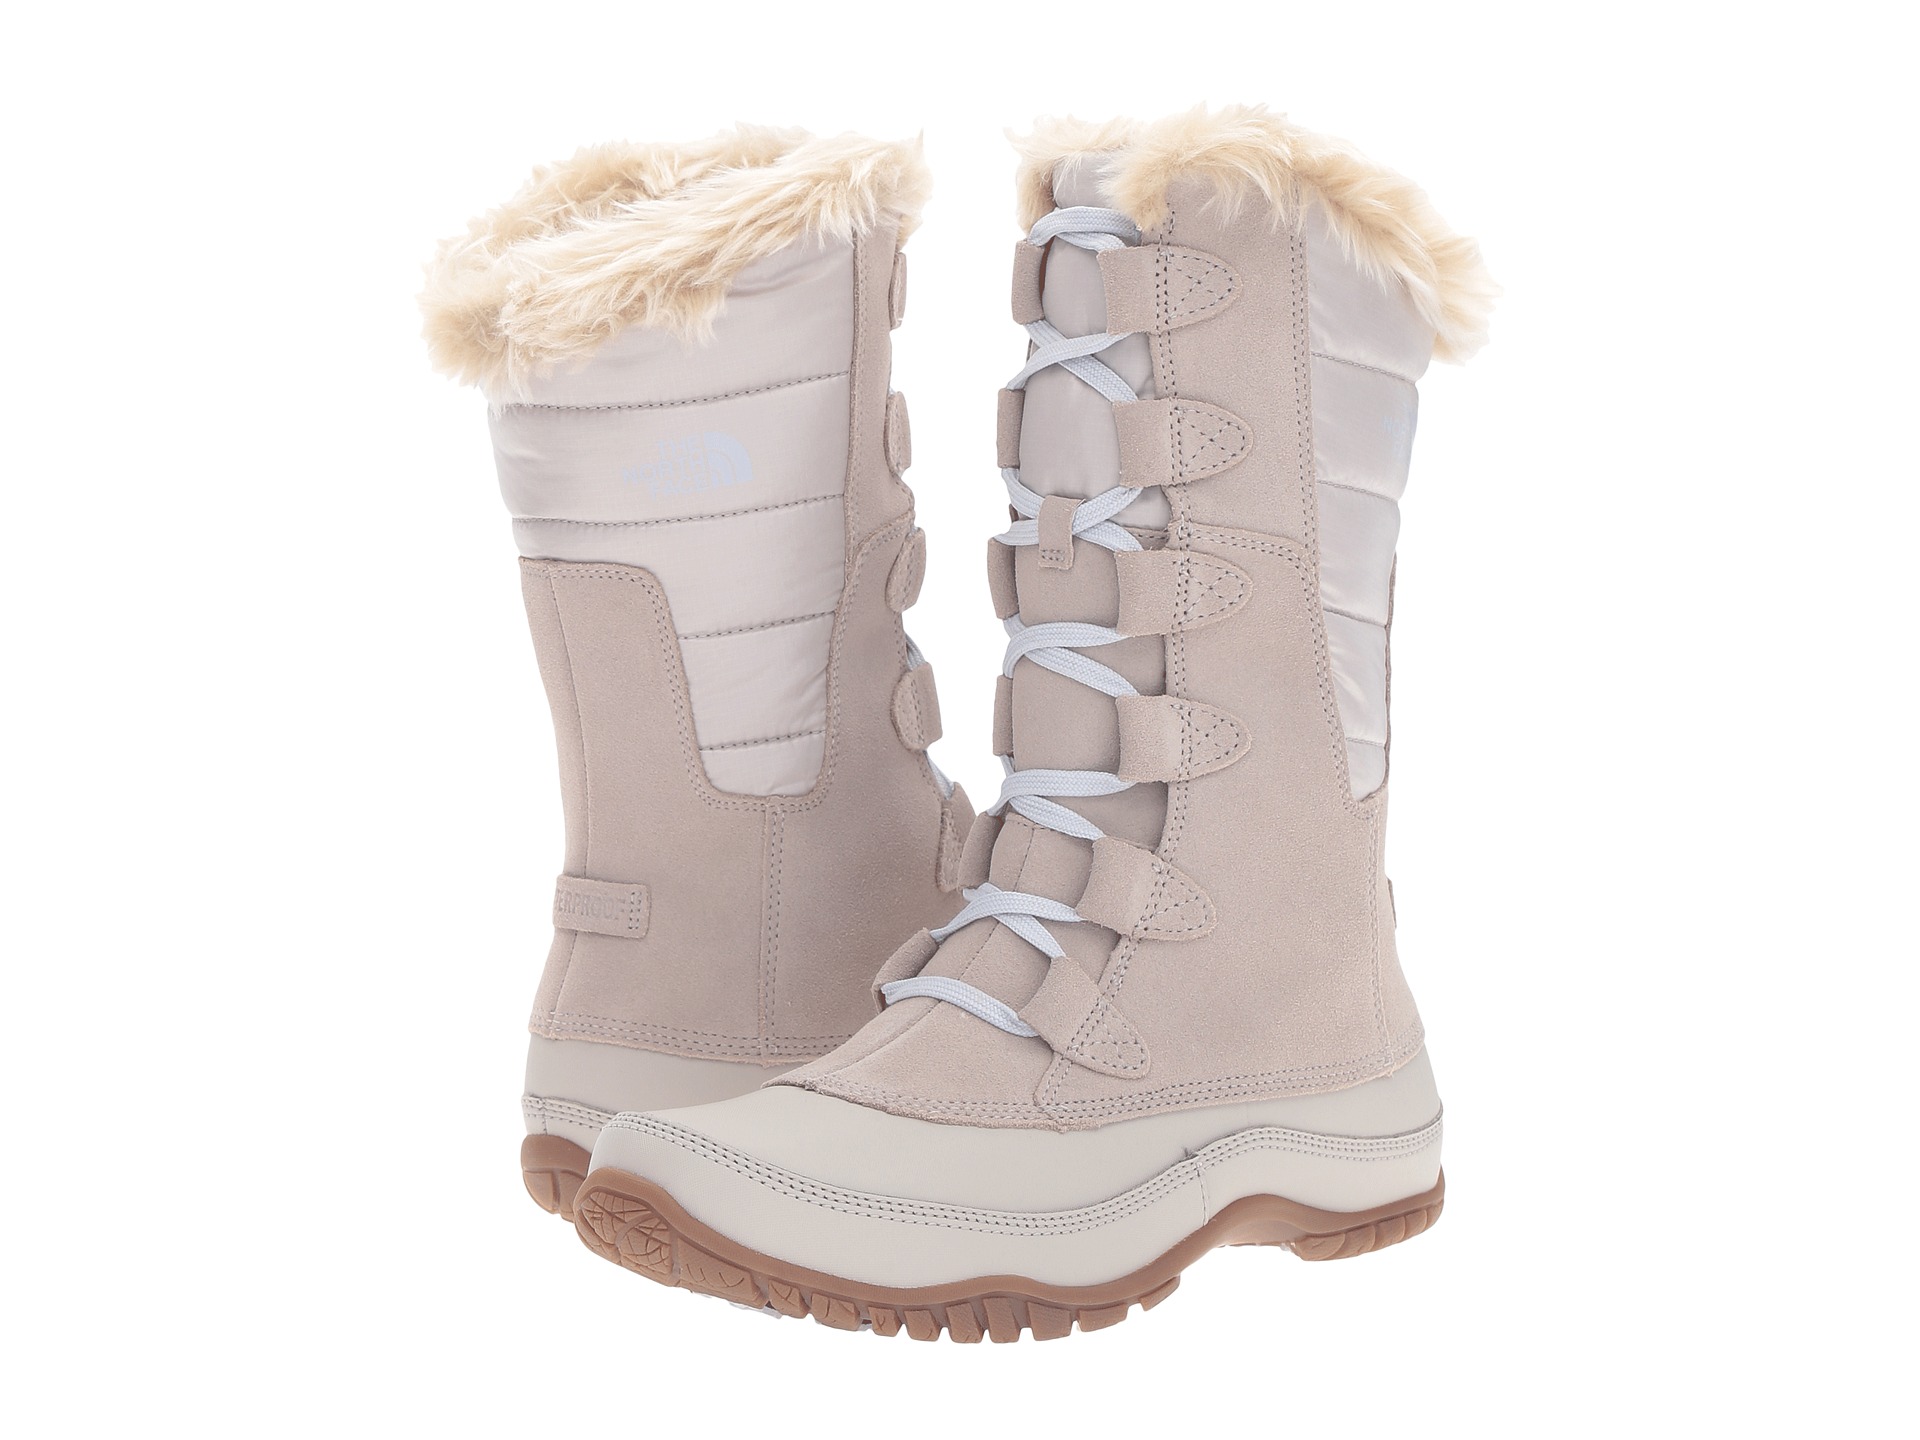 fur north face winter boots womens